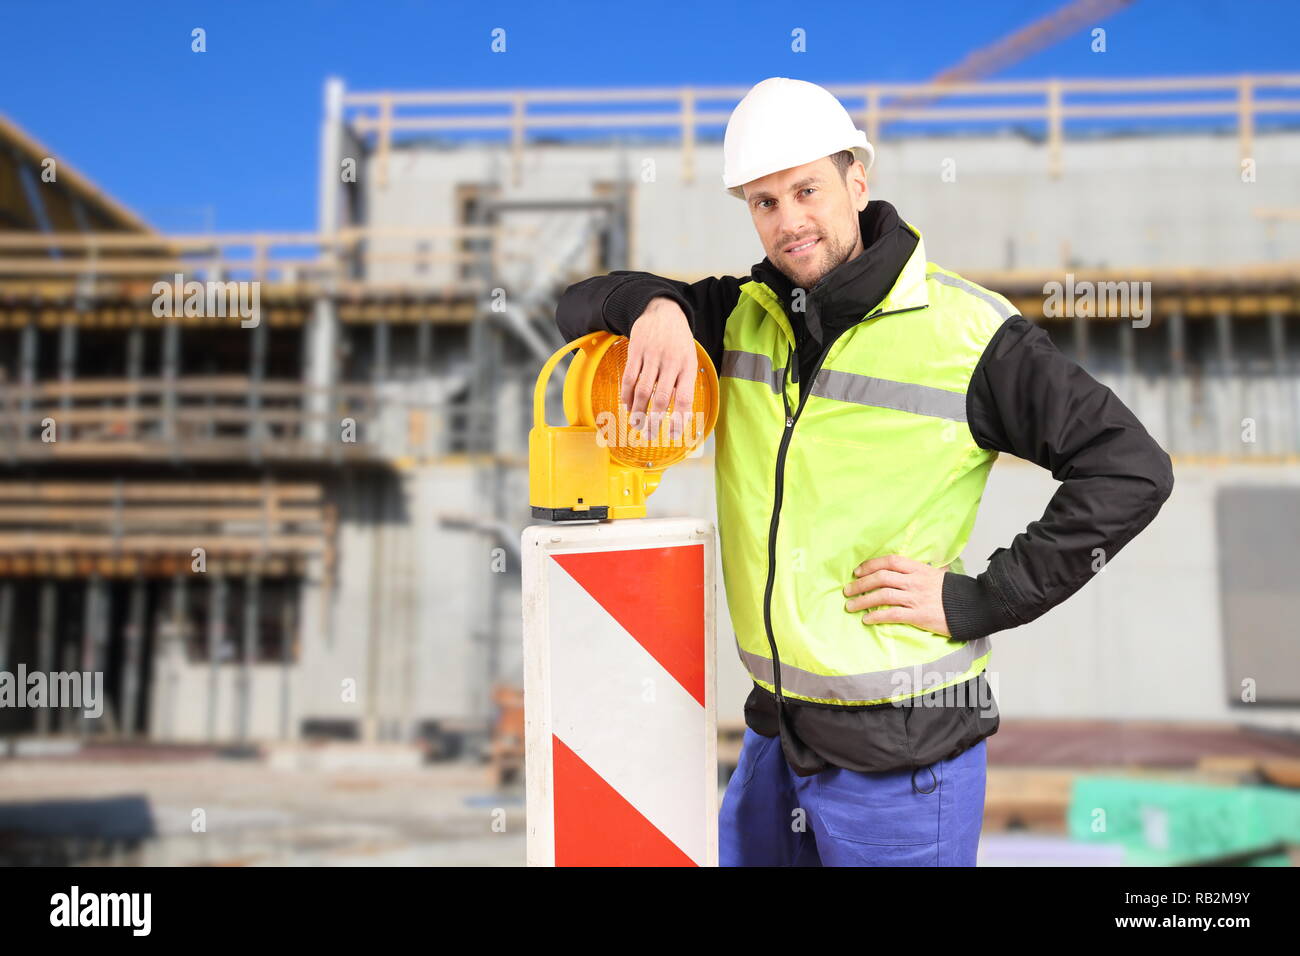 A Construction worker with safety euqipment Stock Photo